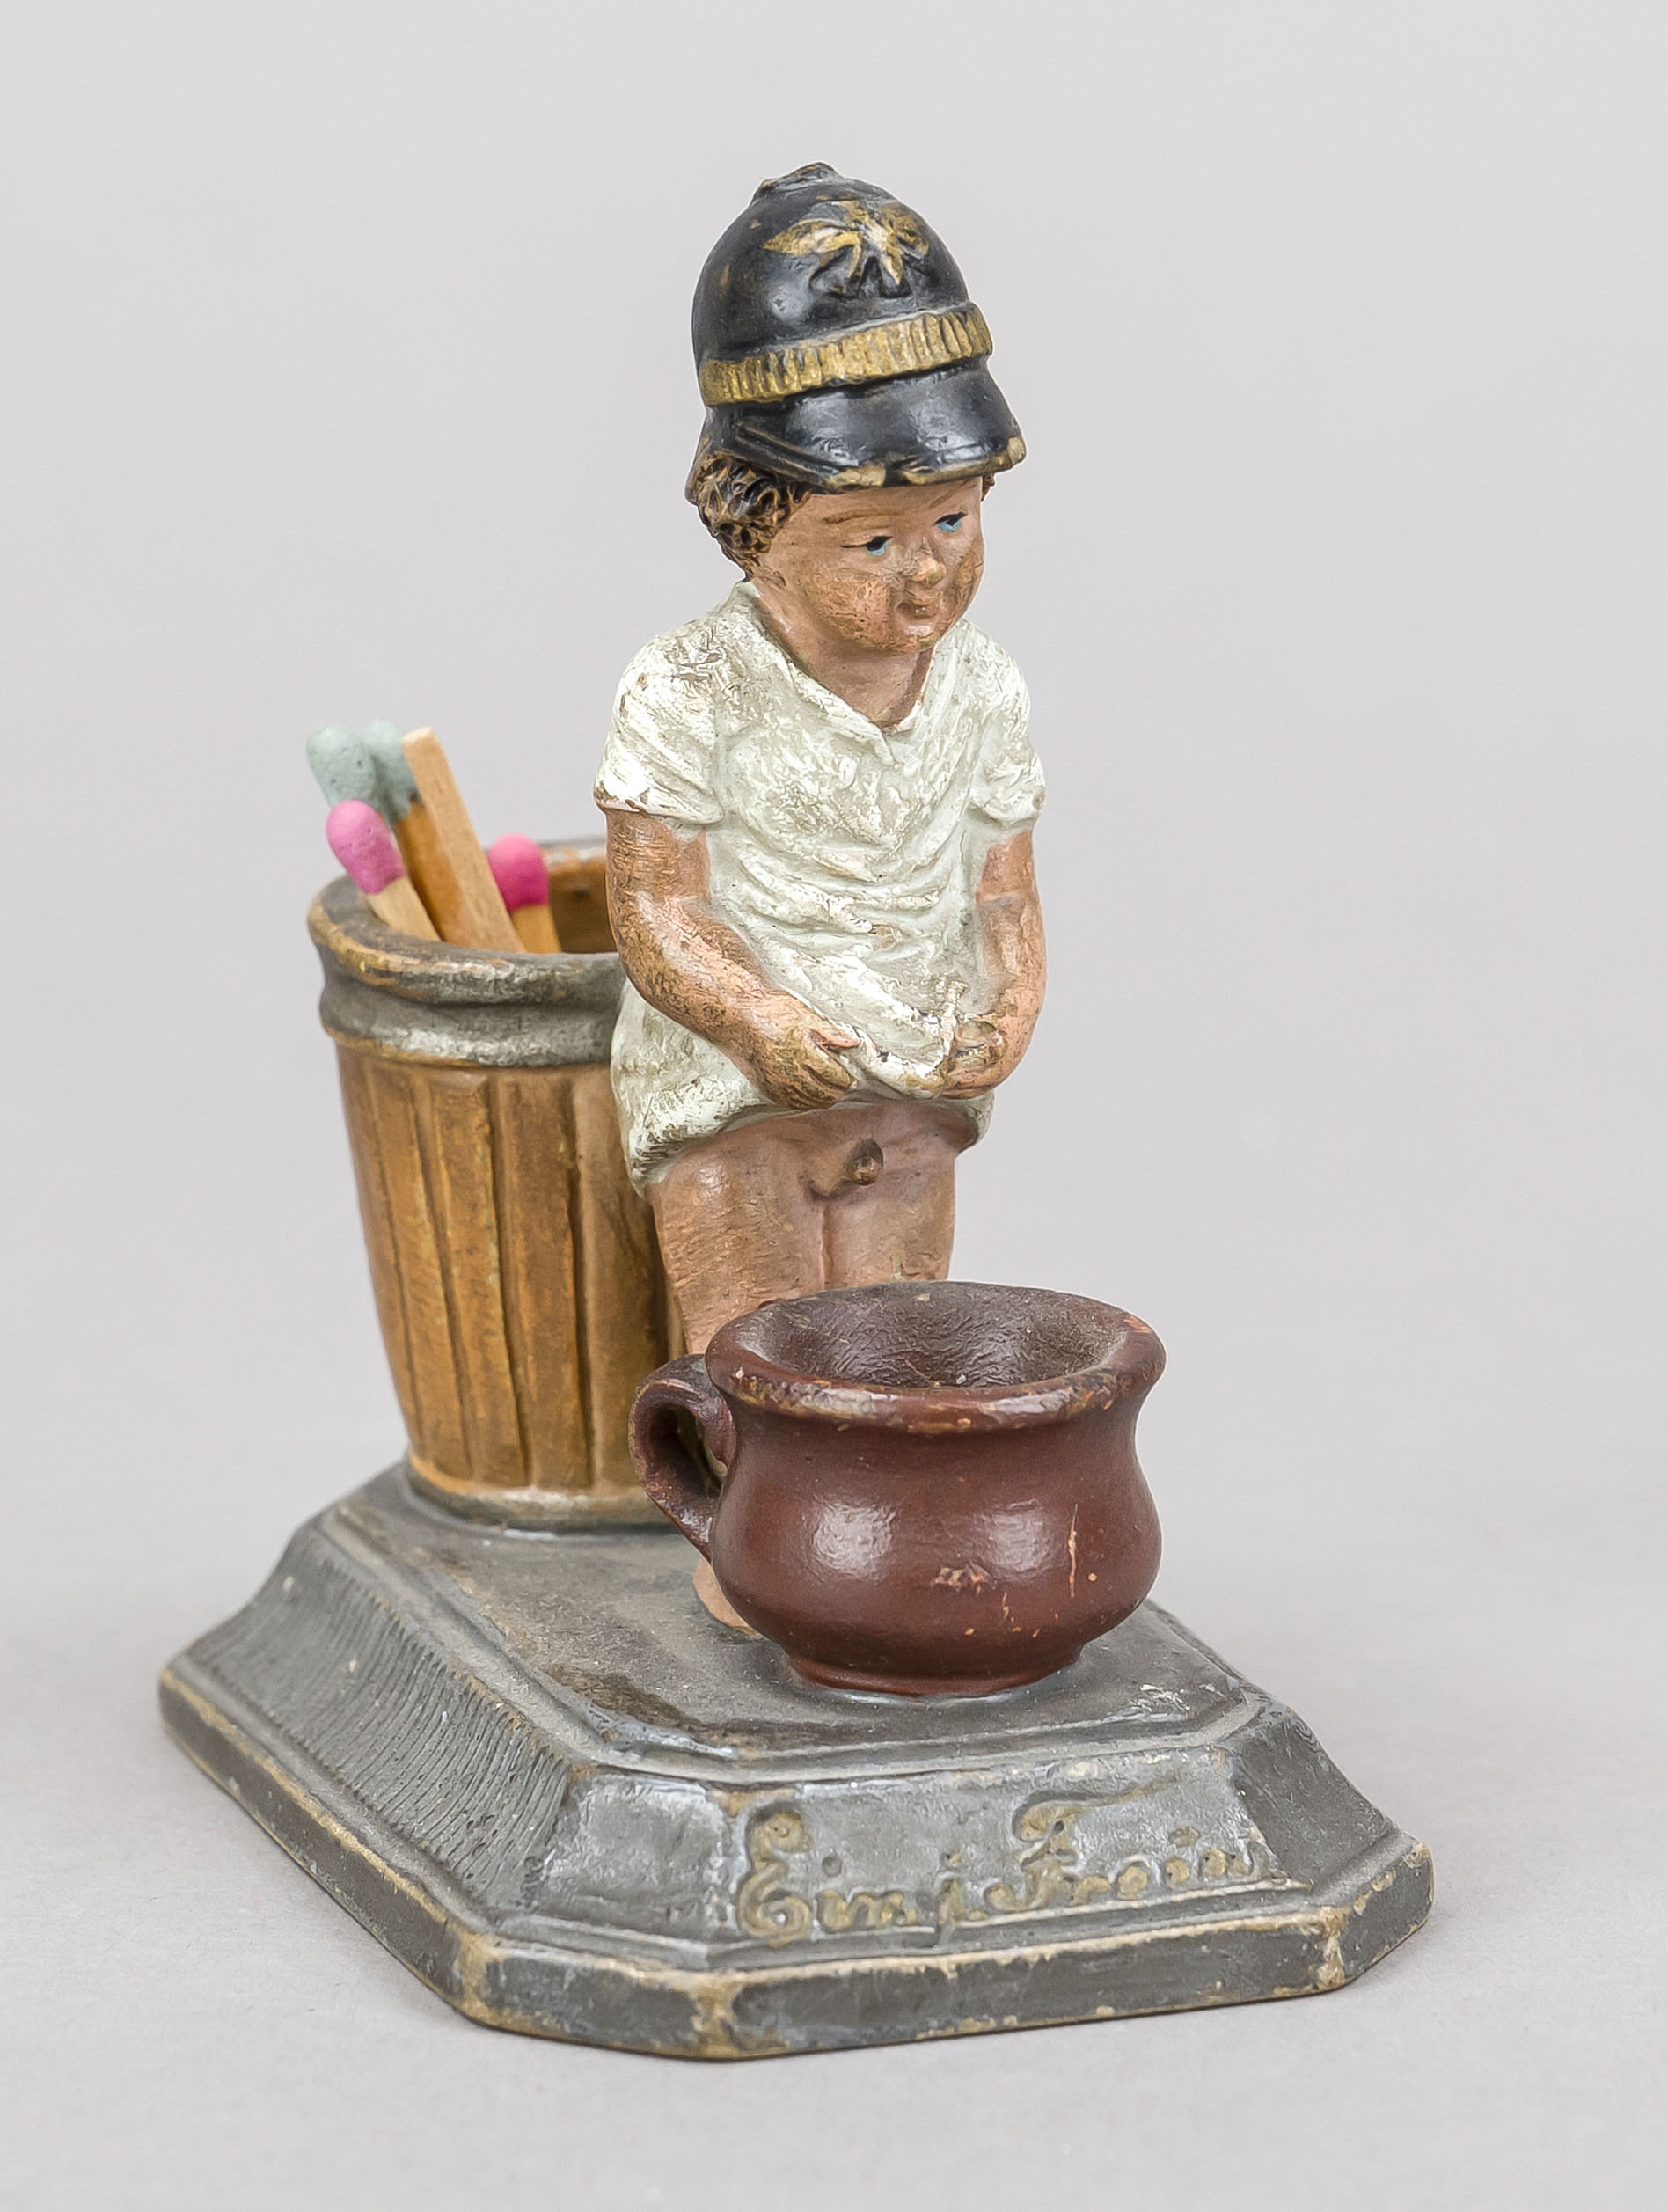 Humorous match holder, late 19th century, polychrome painted and glazed stoneware. Little boy in a